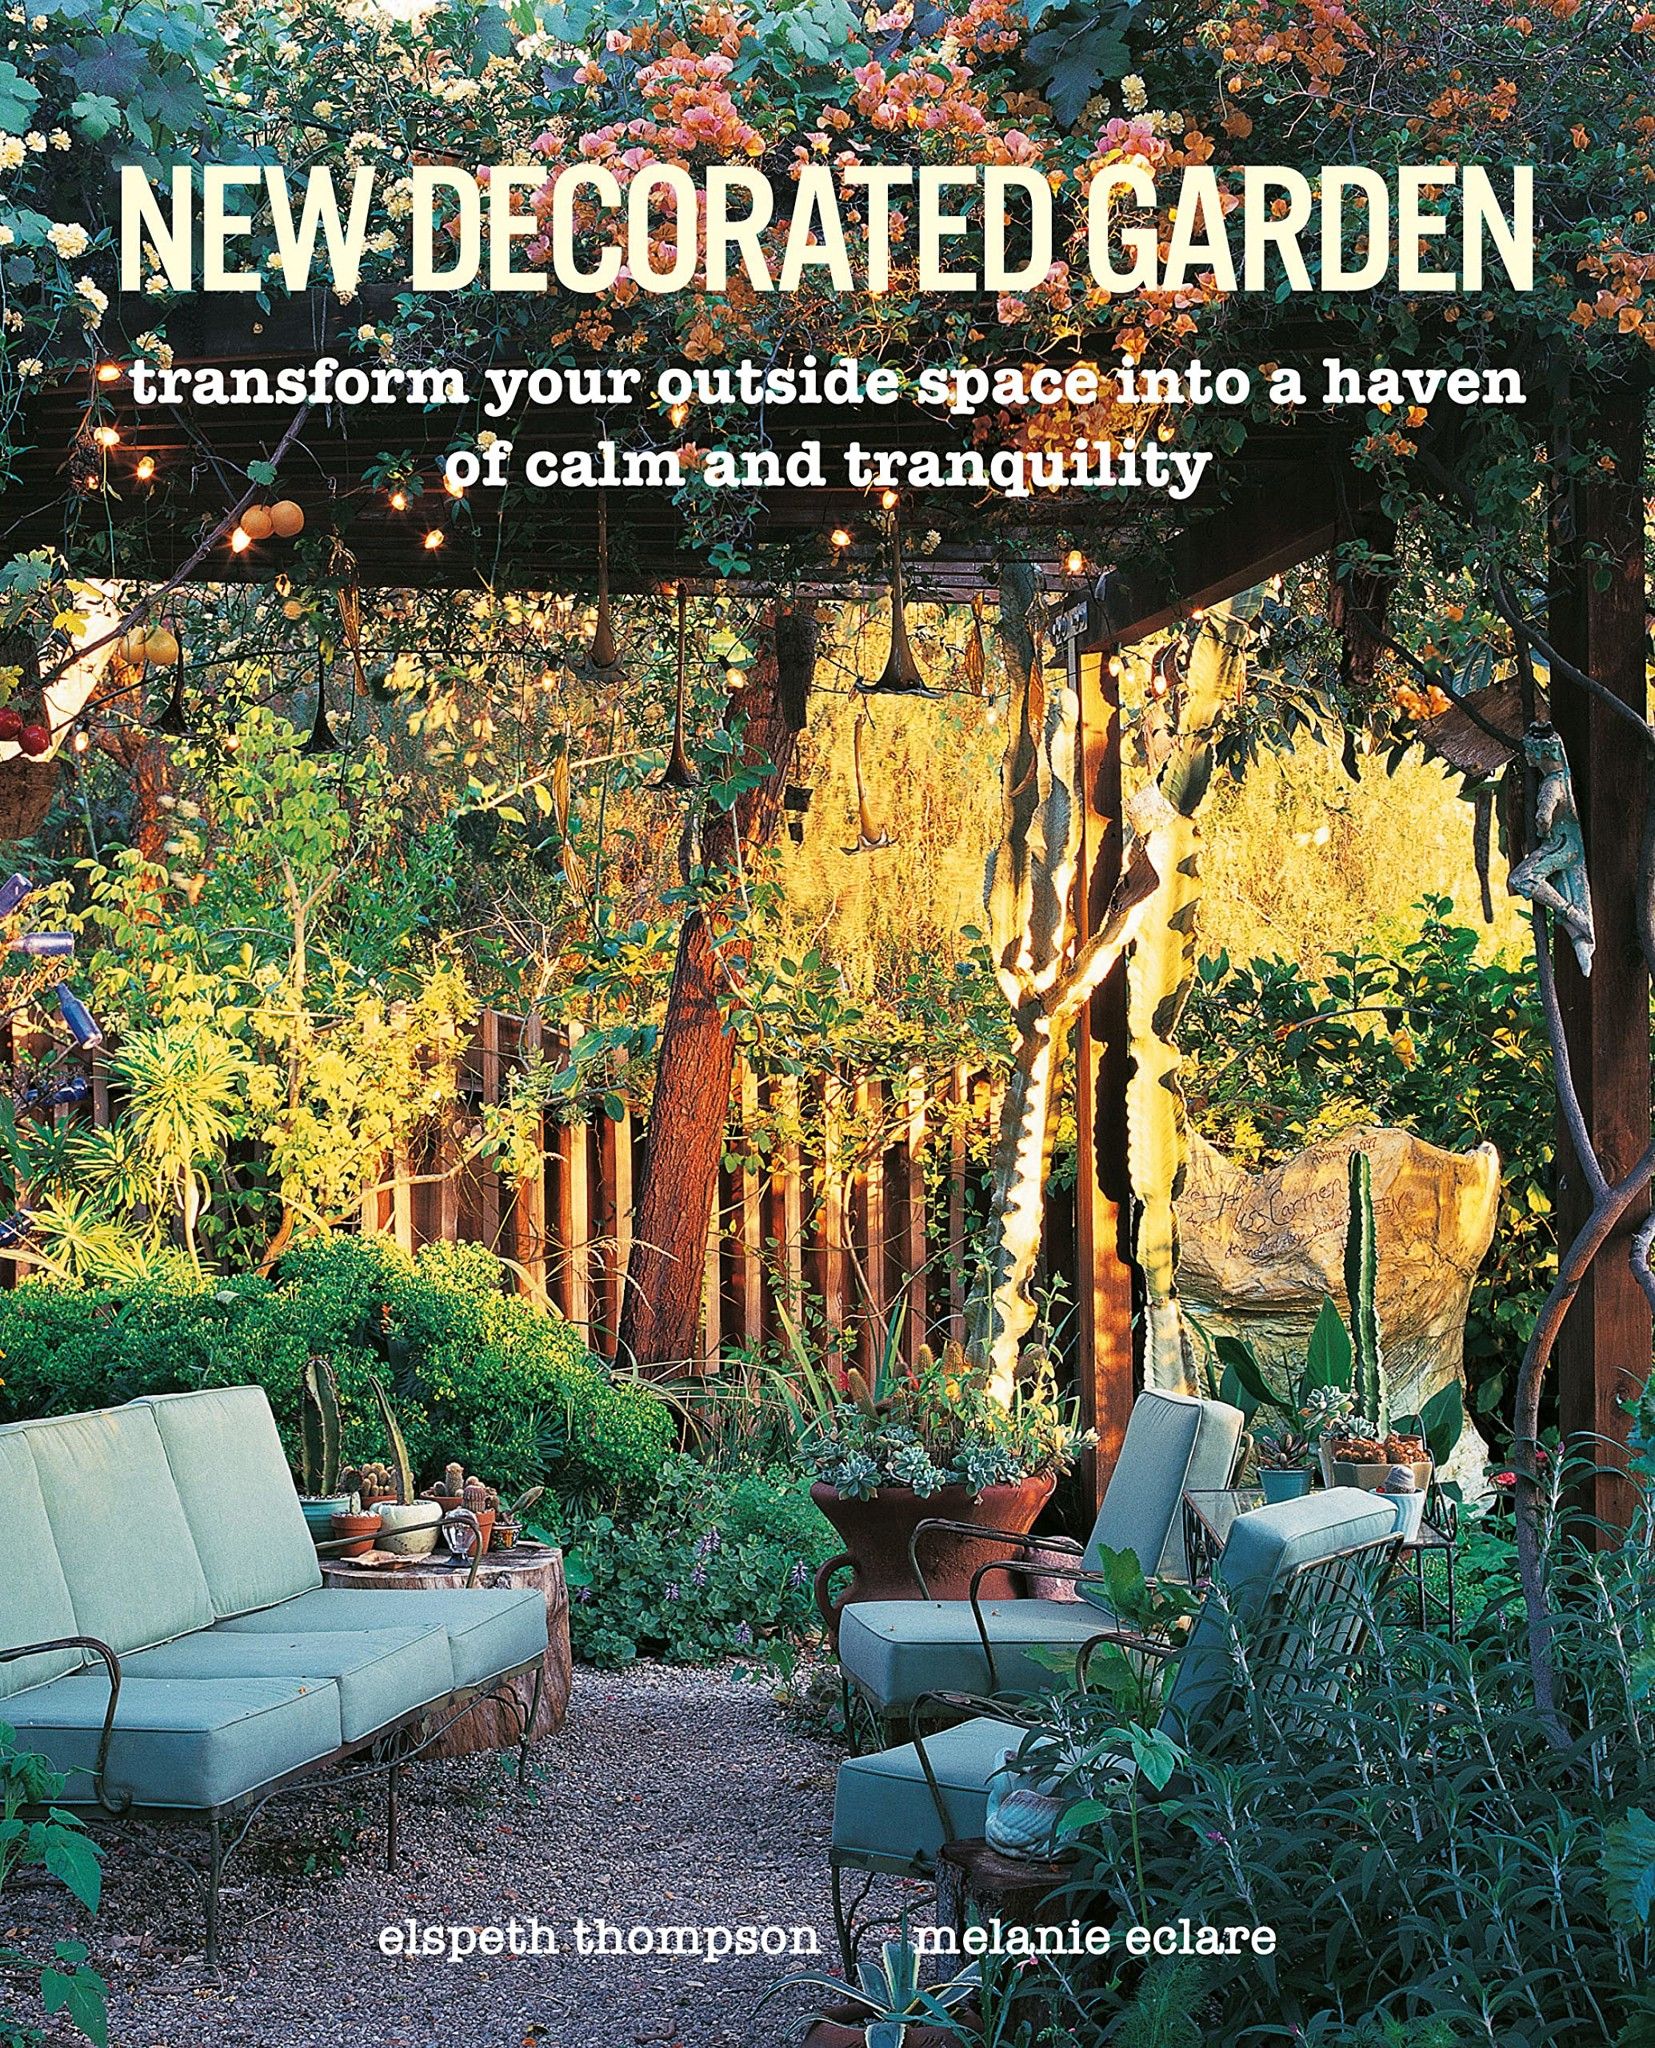  New Decorated Garden: Transform your outside space into a haven of calm and tranquility 